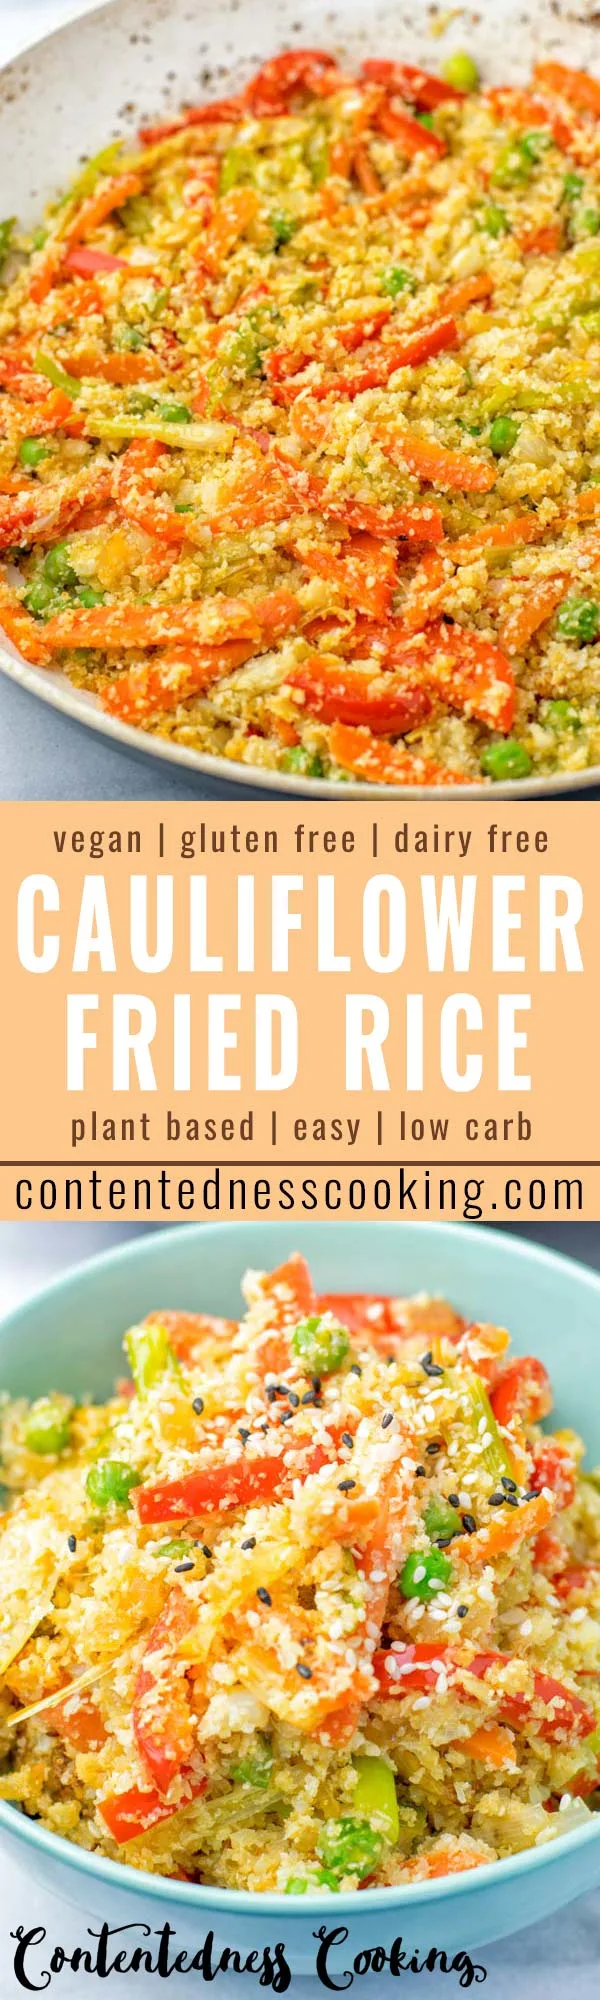 This Cauliflower Fried Rice is a super easy to make for your one pan meals and ready in 15 minutes. Naturally vegan, gluten free and low carb. An amazing dinner, lunch, meal prep, work lunch idea that the whole family will love. Healthy and so satisfying, yum! #vegan #dairyfree #glutenfree #vegetarian #cauliflowerrice #dinner #lunch #onepanmeals #lowcarbmeals #budgetmeals #familydinnershealthy #contentednesscooking #mealprep #worklunchideas 